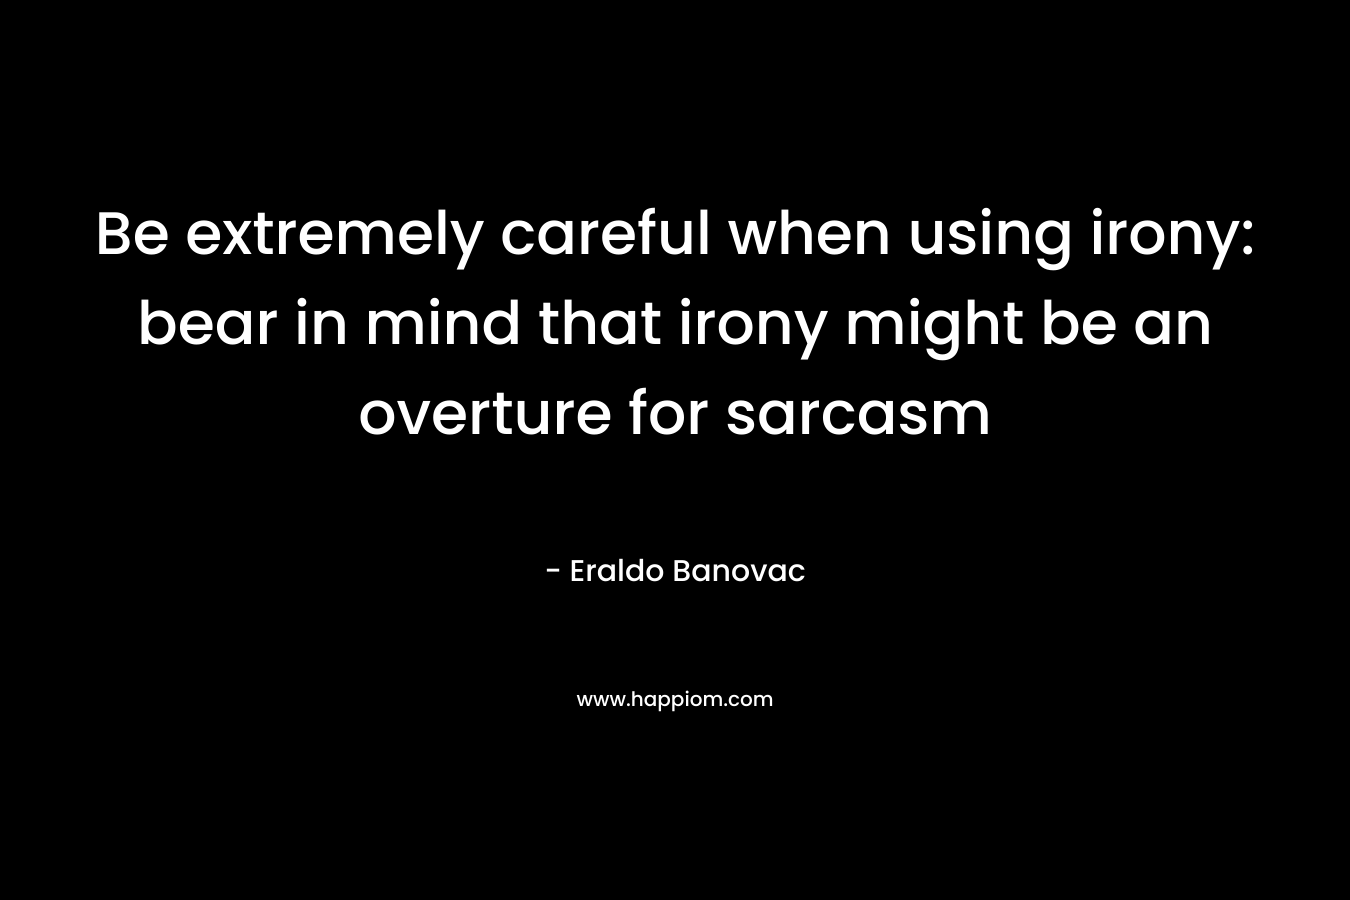 Be extremely careful when using irony: bear in mind that irony might be an overture for sarcasm – Eraldo Banovac